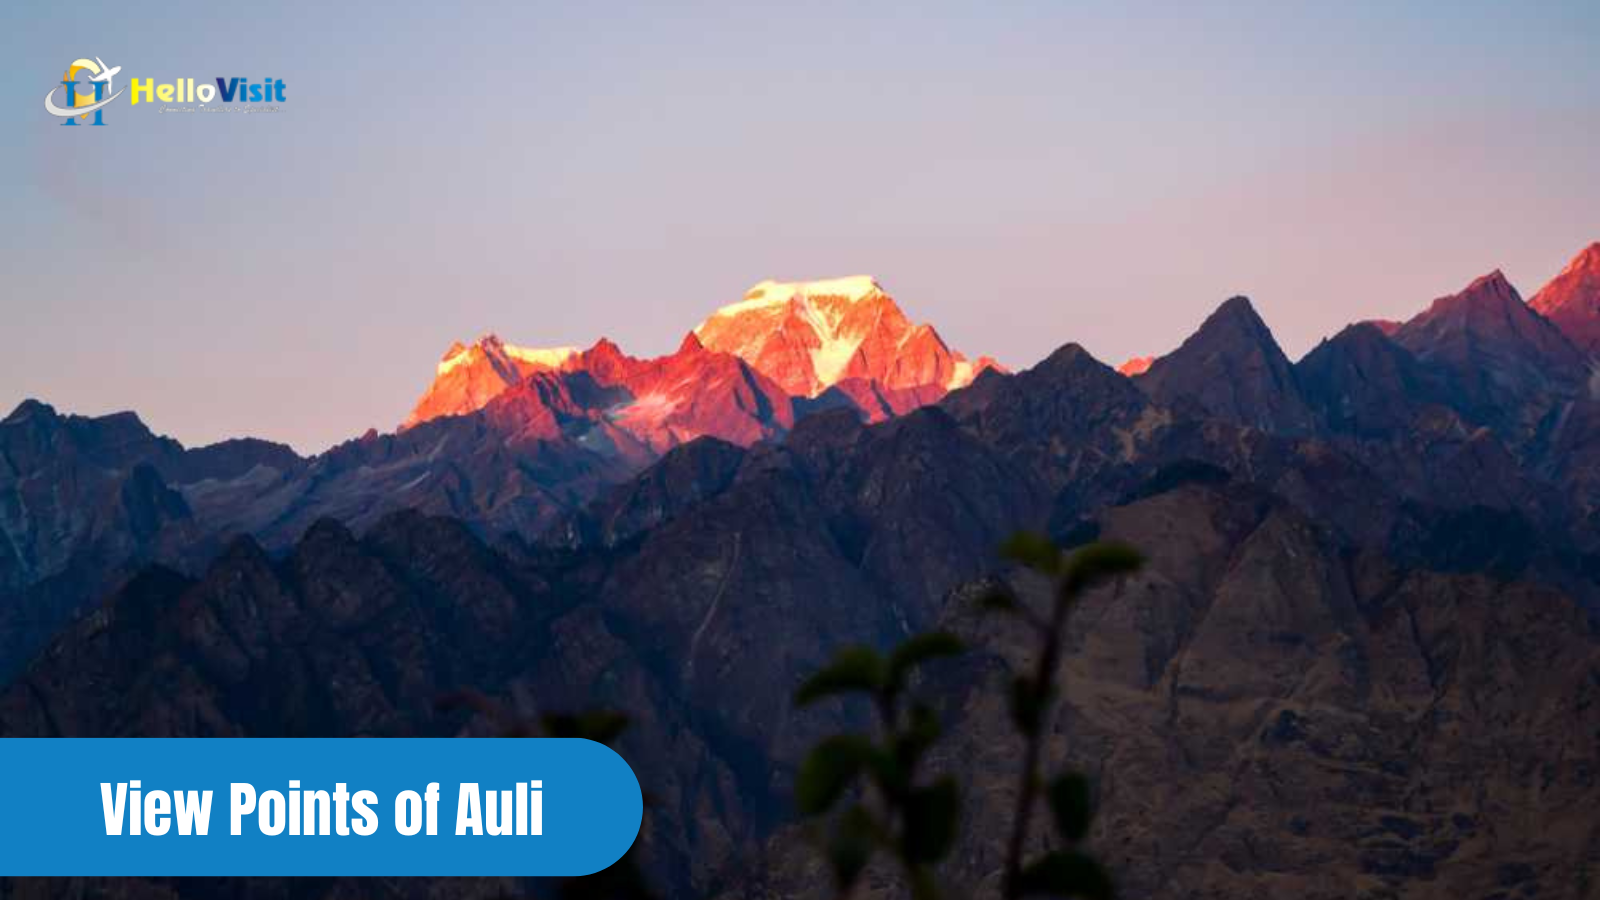 View Points of Auli